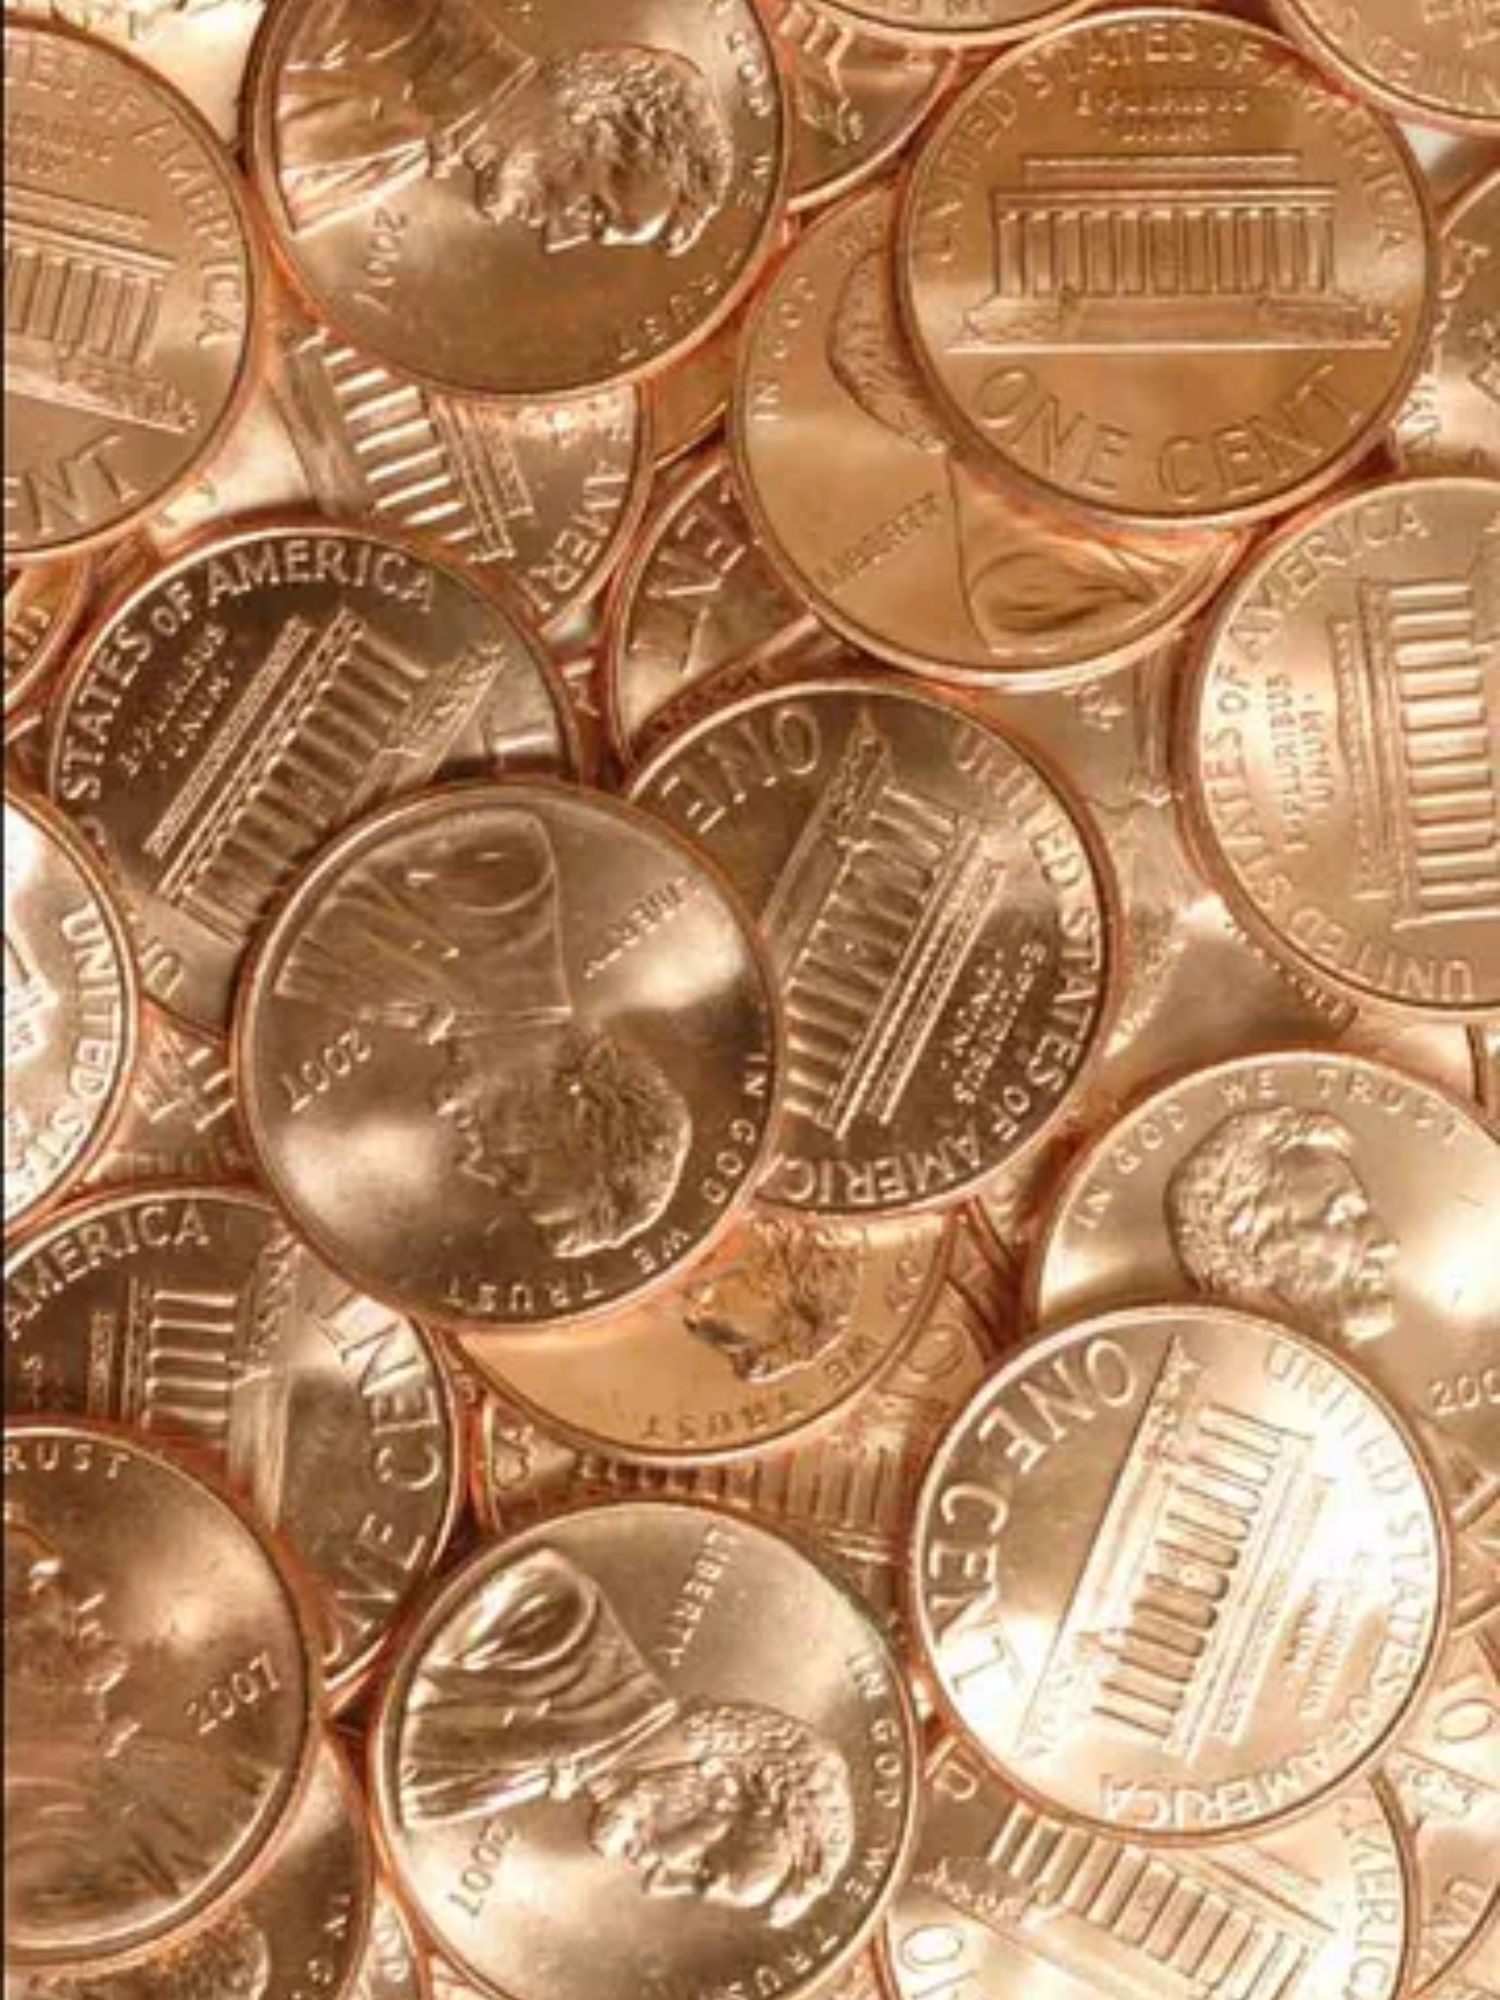 Pennies for Palestine